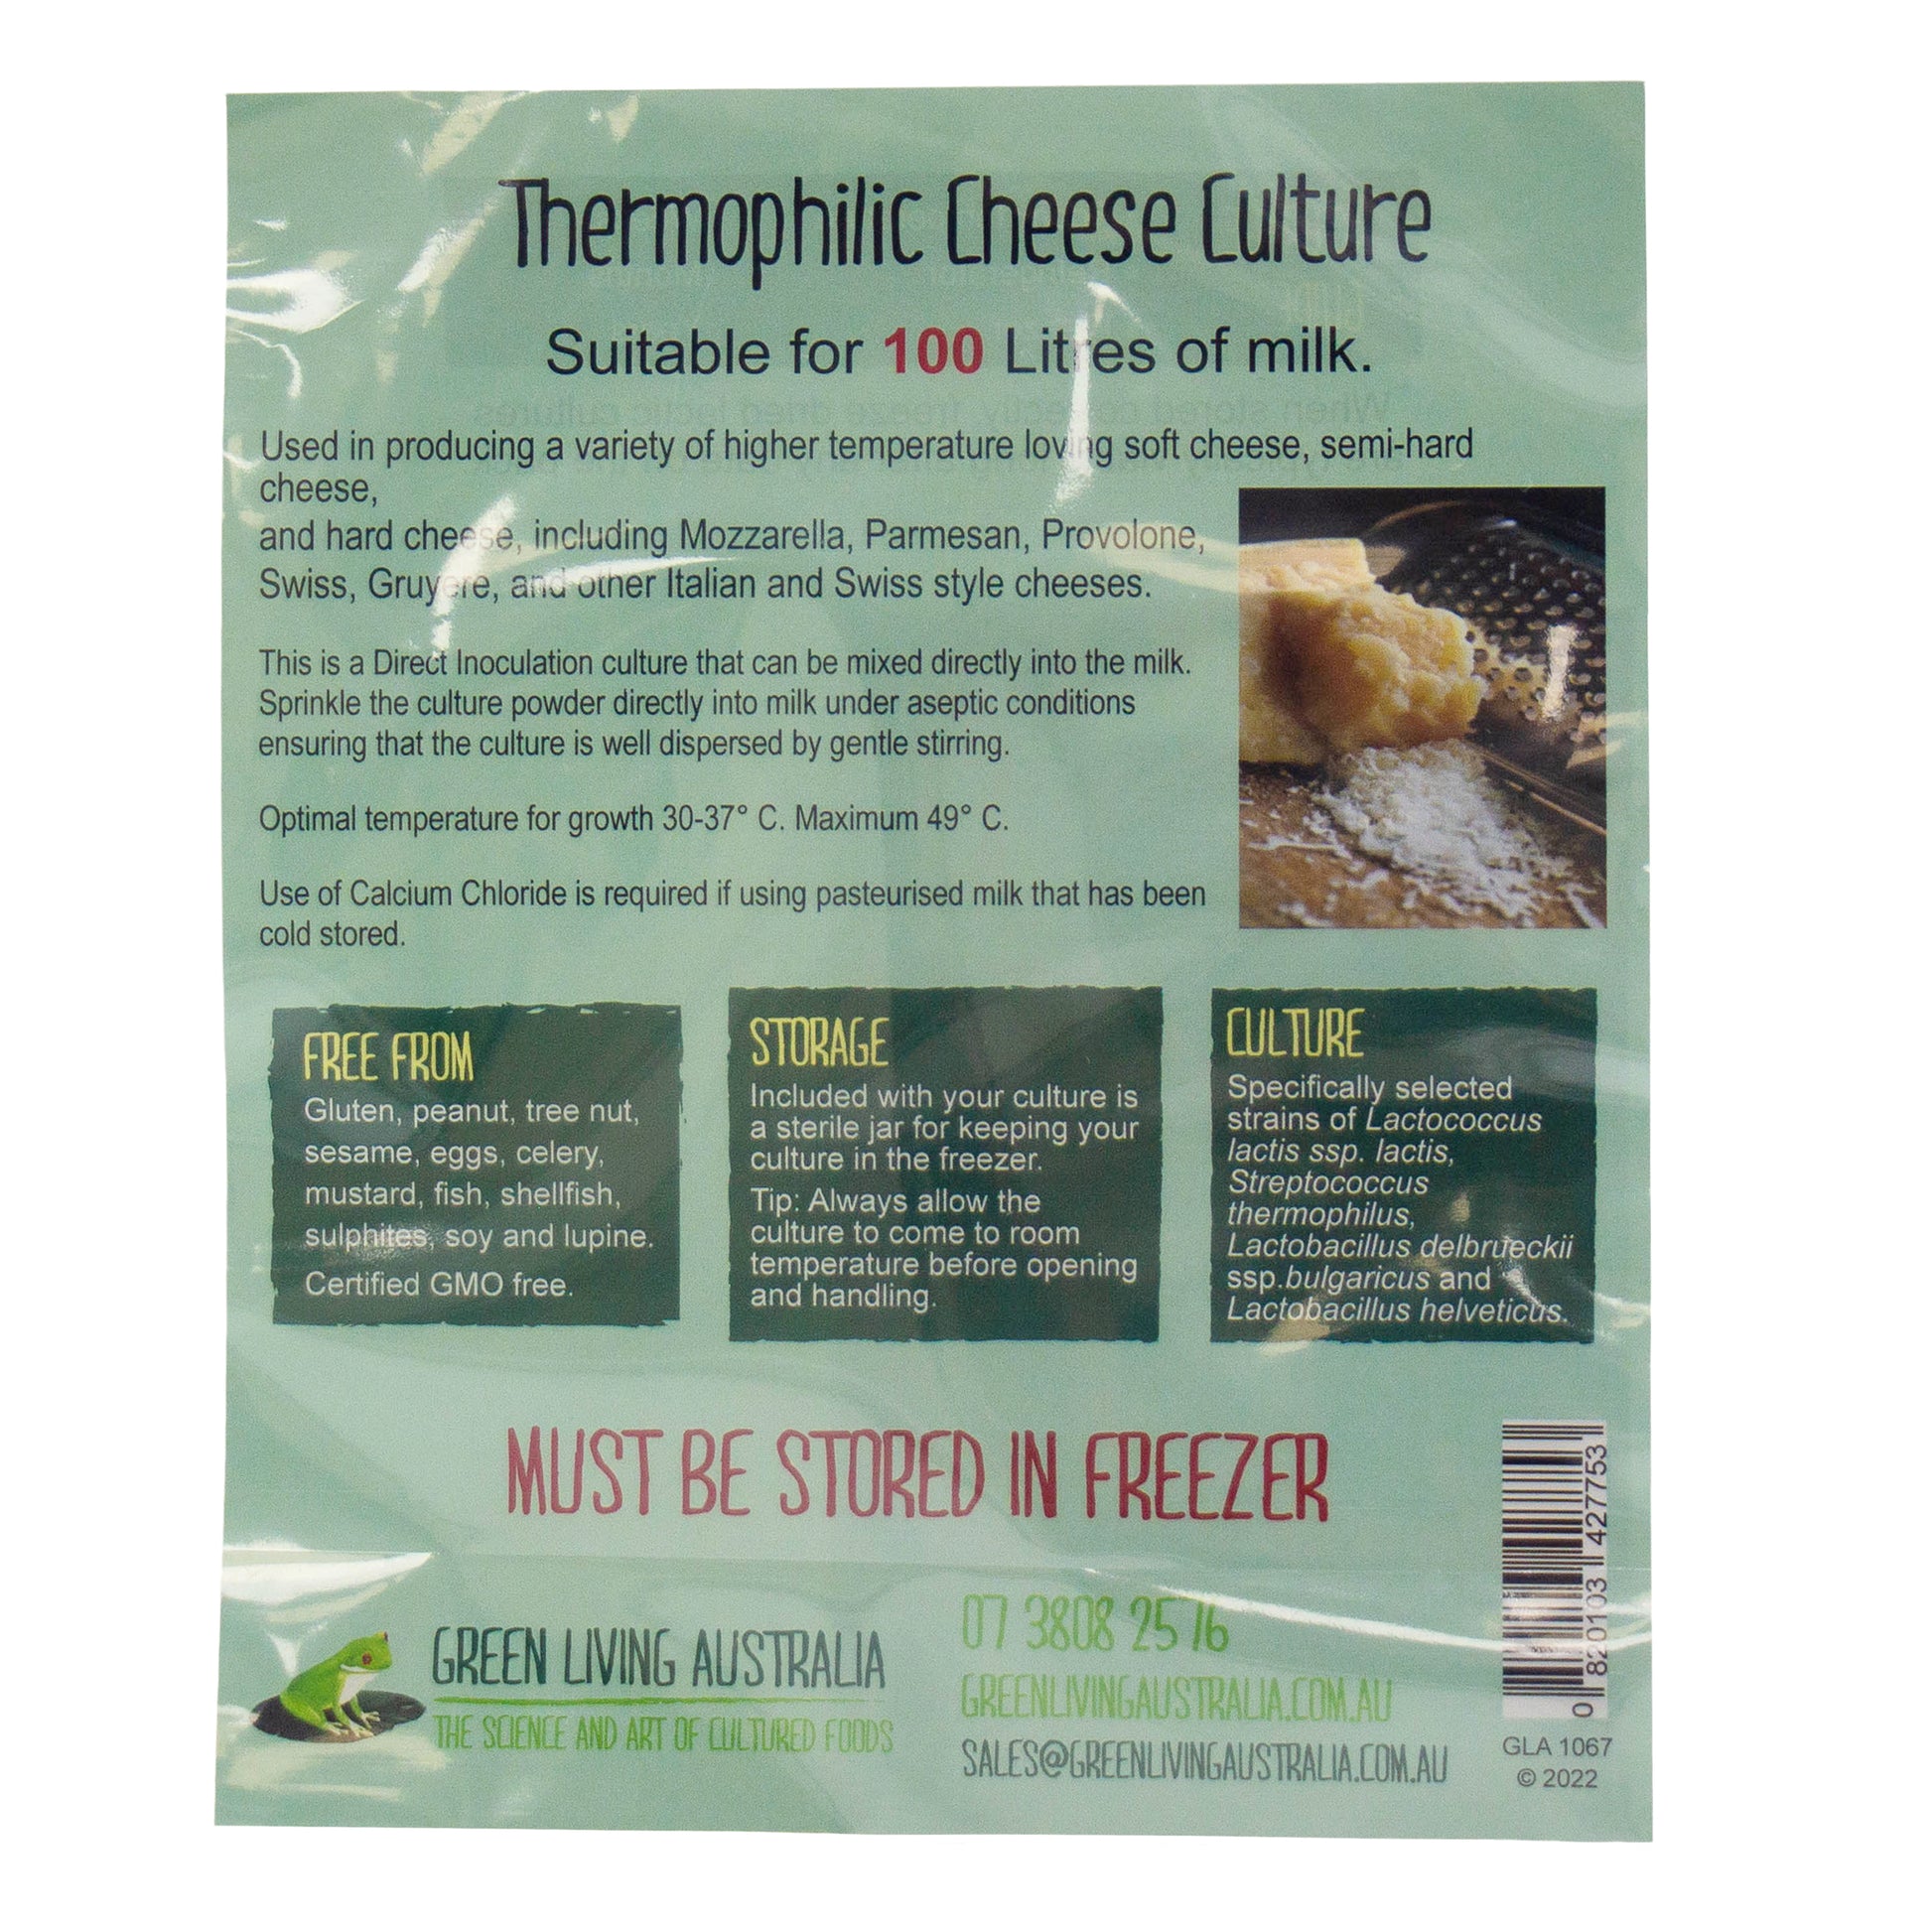 Thermophilic cheese culture used to make higher temperature cheeses like Italian and Swiss cheeses. This packet is suitable for up to 100 litres of milk. 